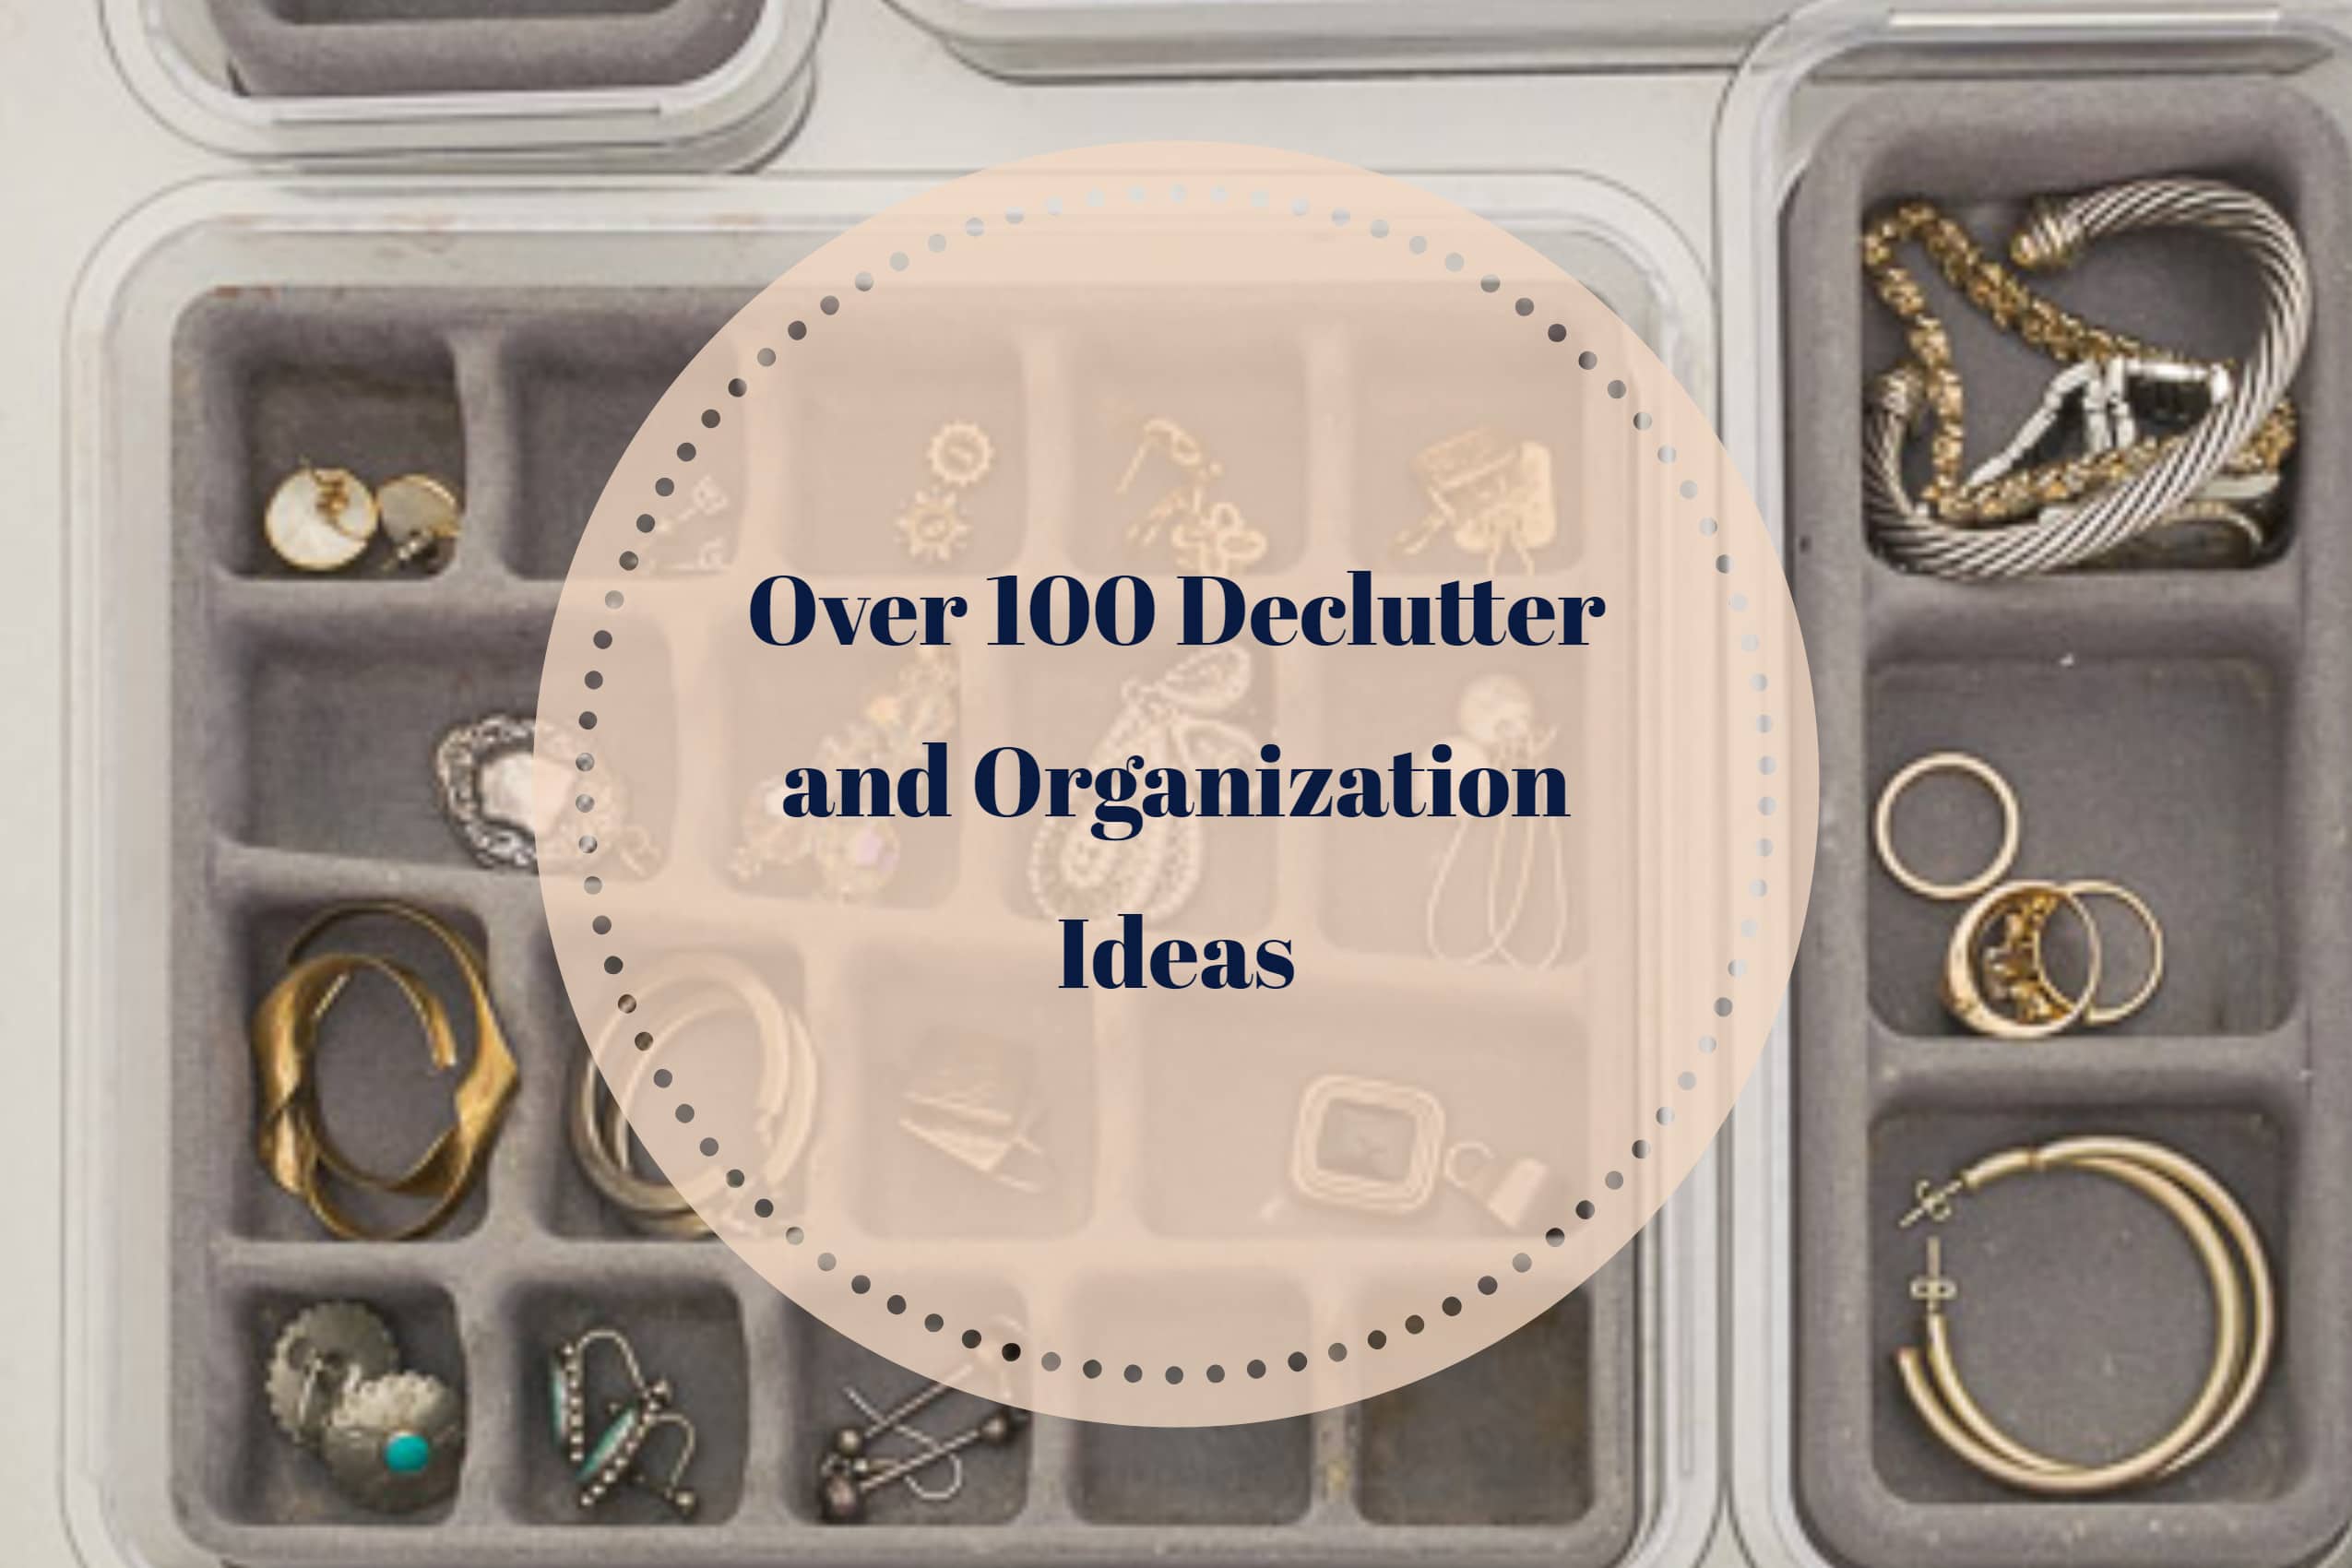 Over 100 Great Declutter and Organization Ideas